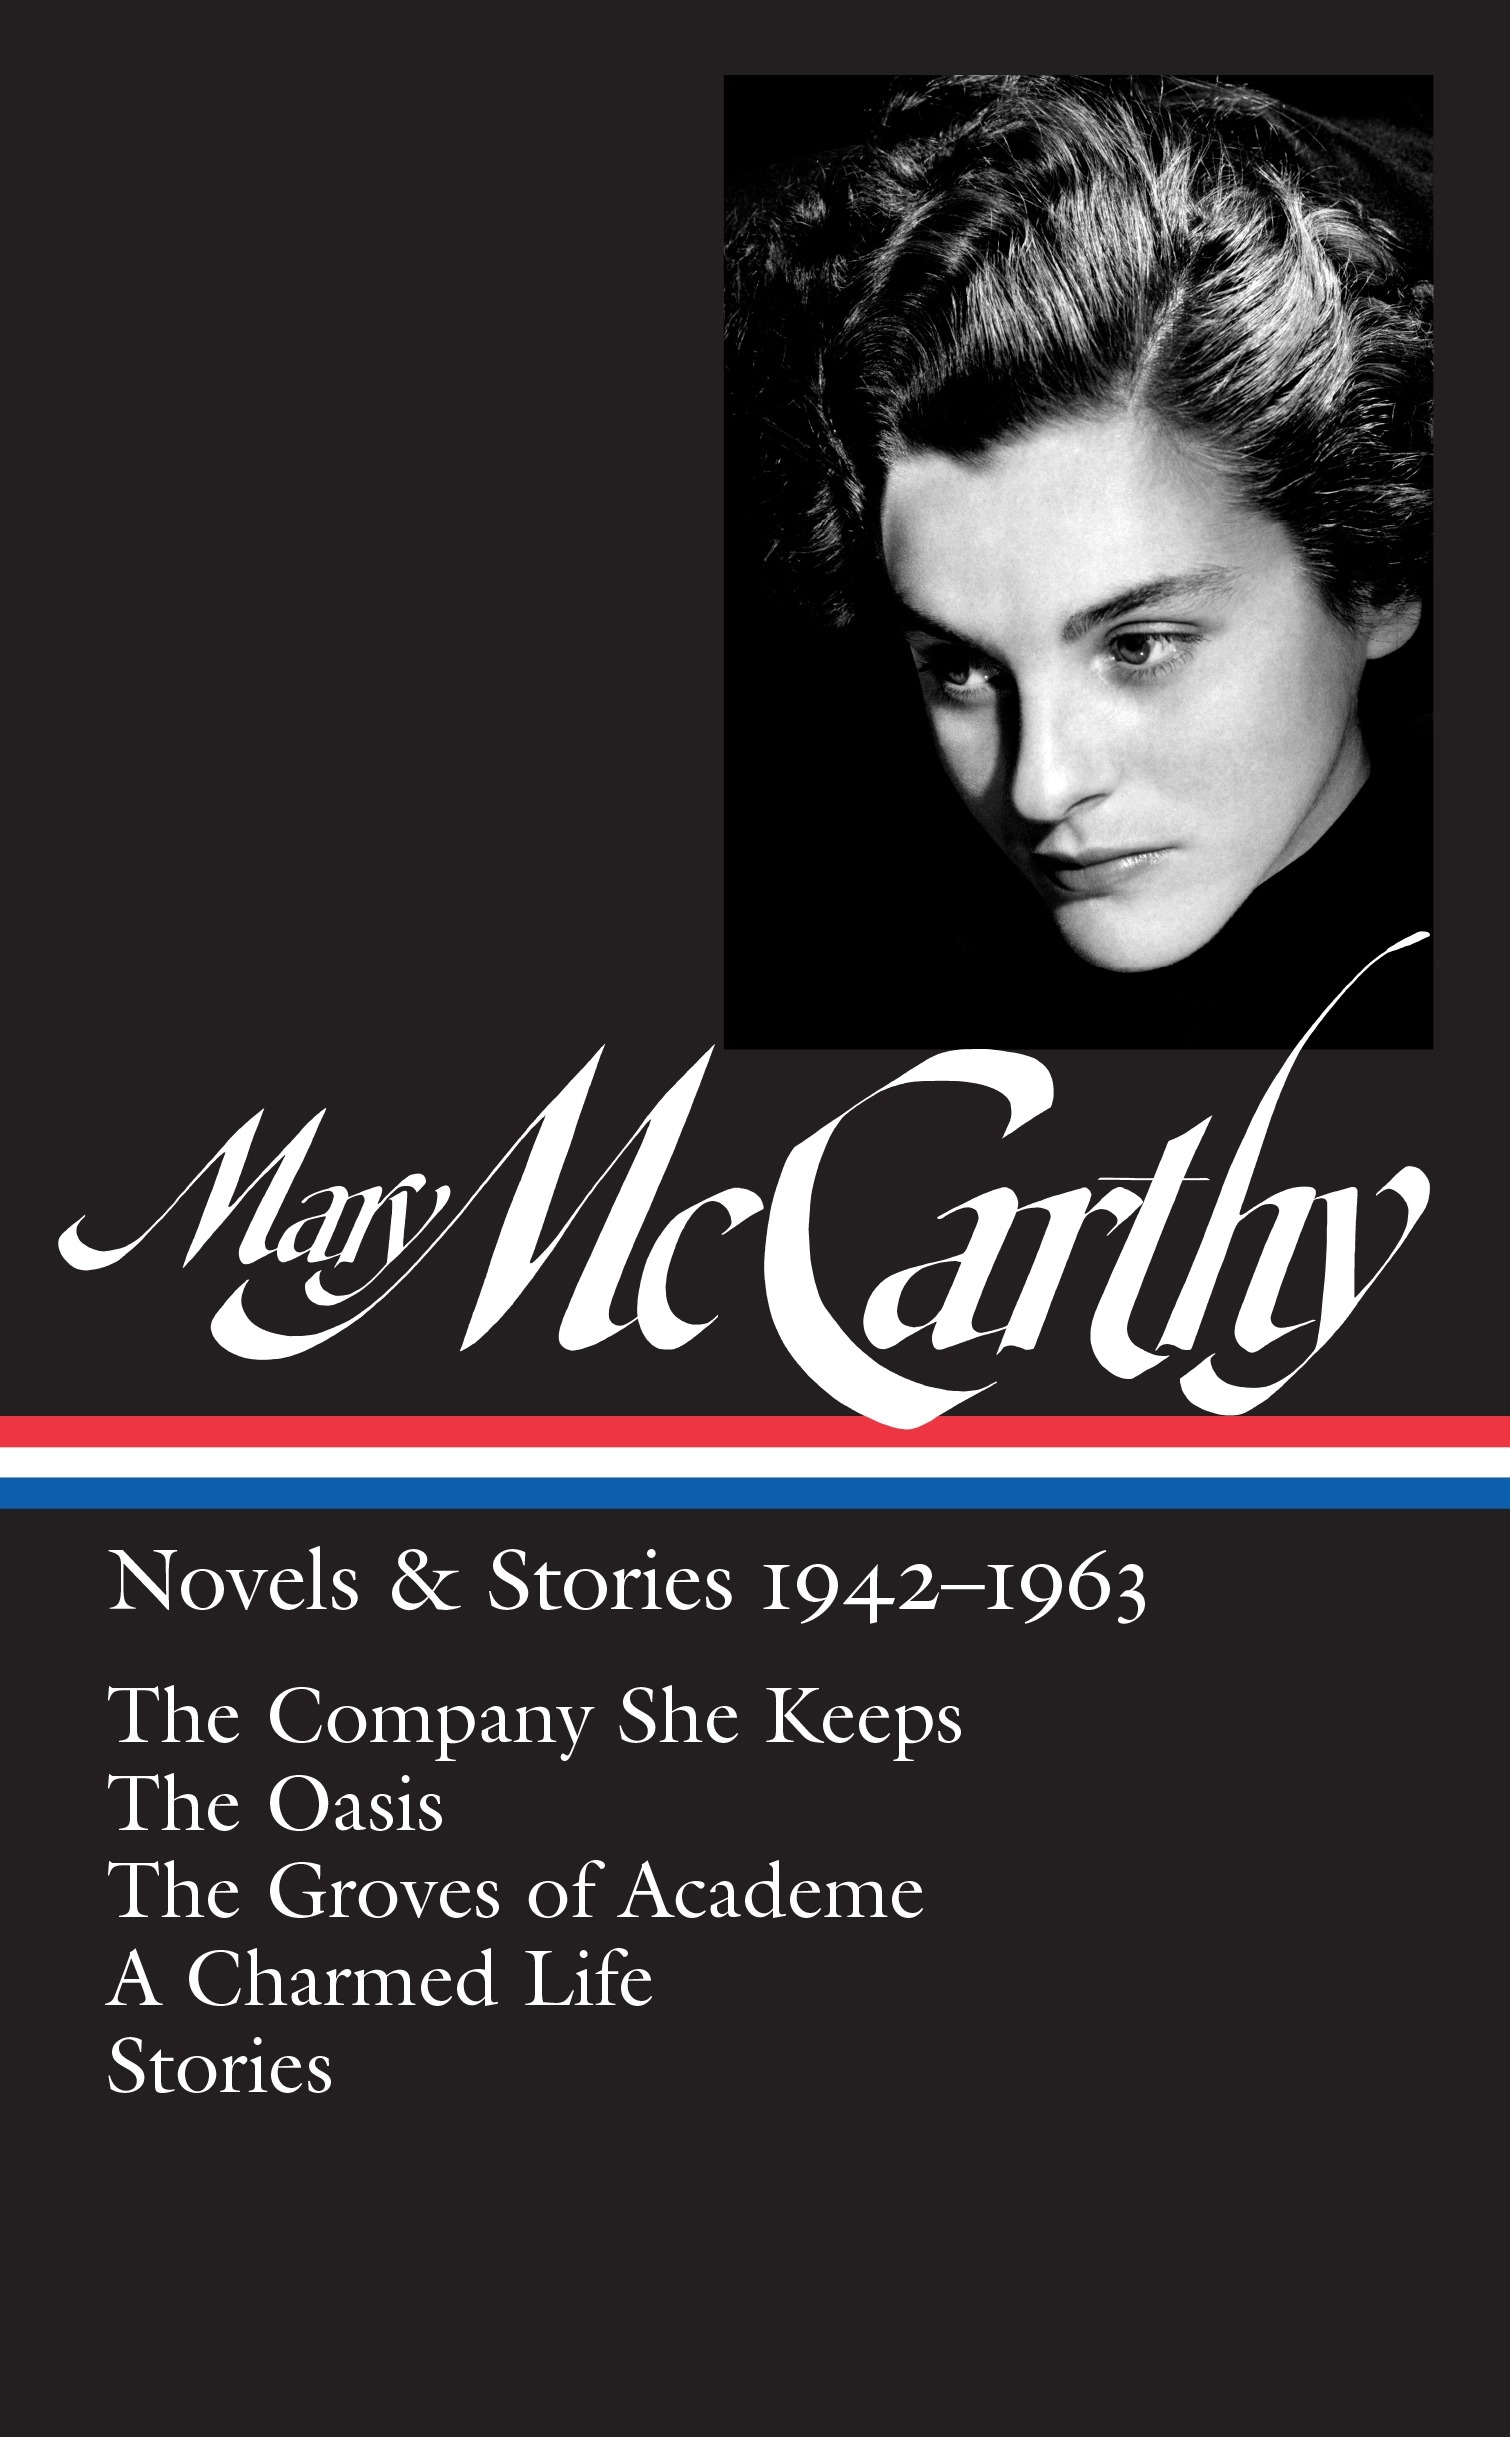 the group mary mccarthy review